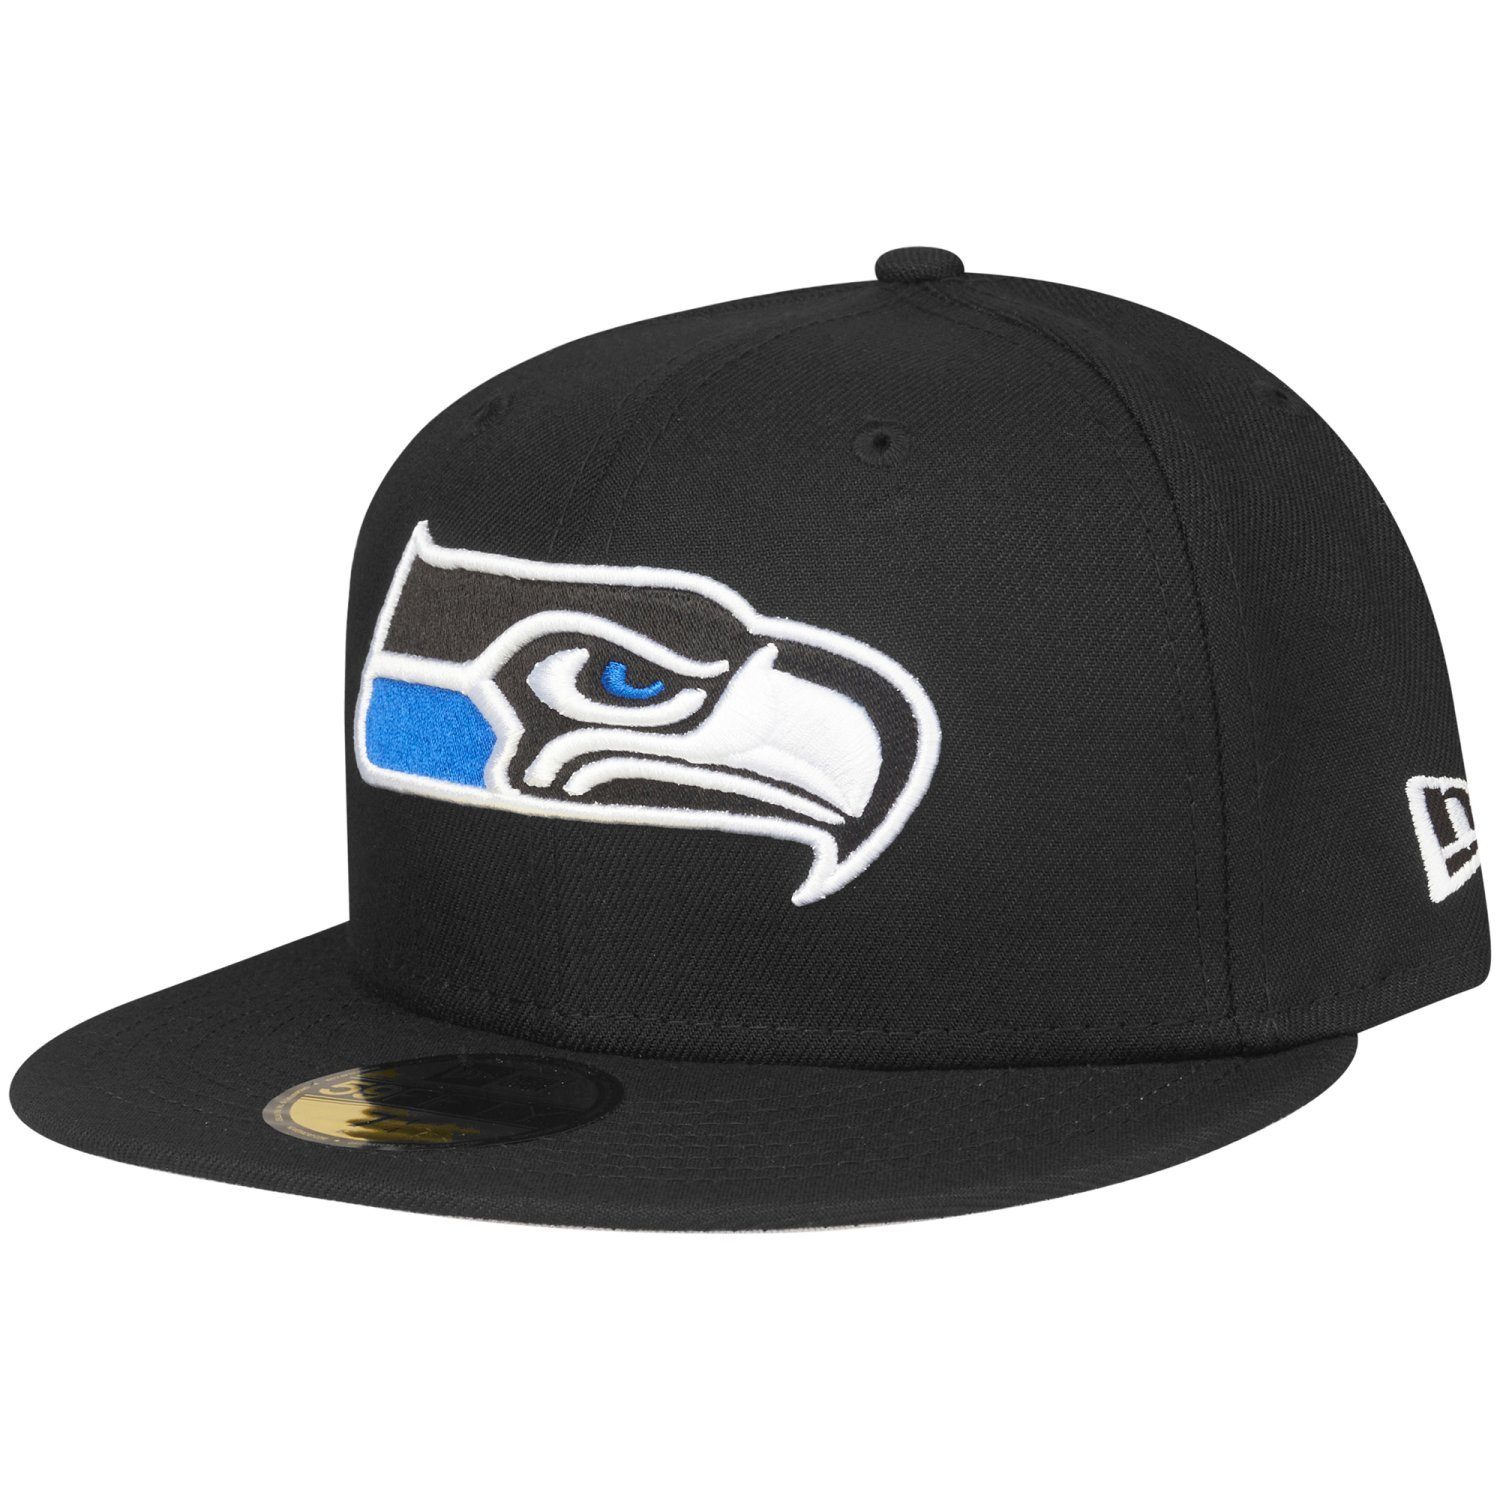 New Era Fitted Cap 59Fifty NFL TEAMS Seattle Seahawks